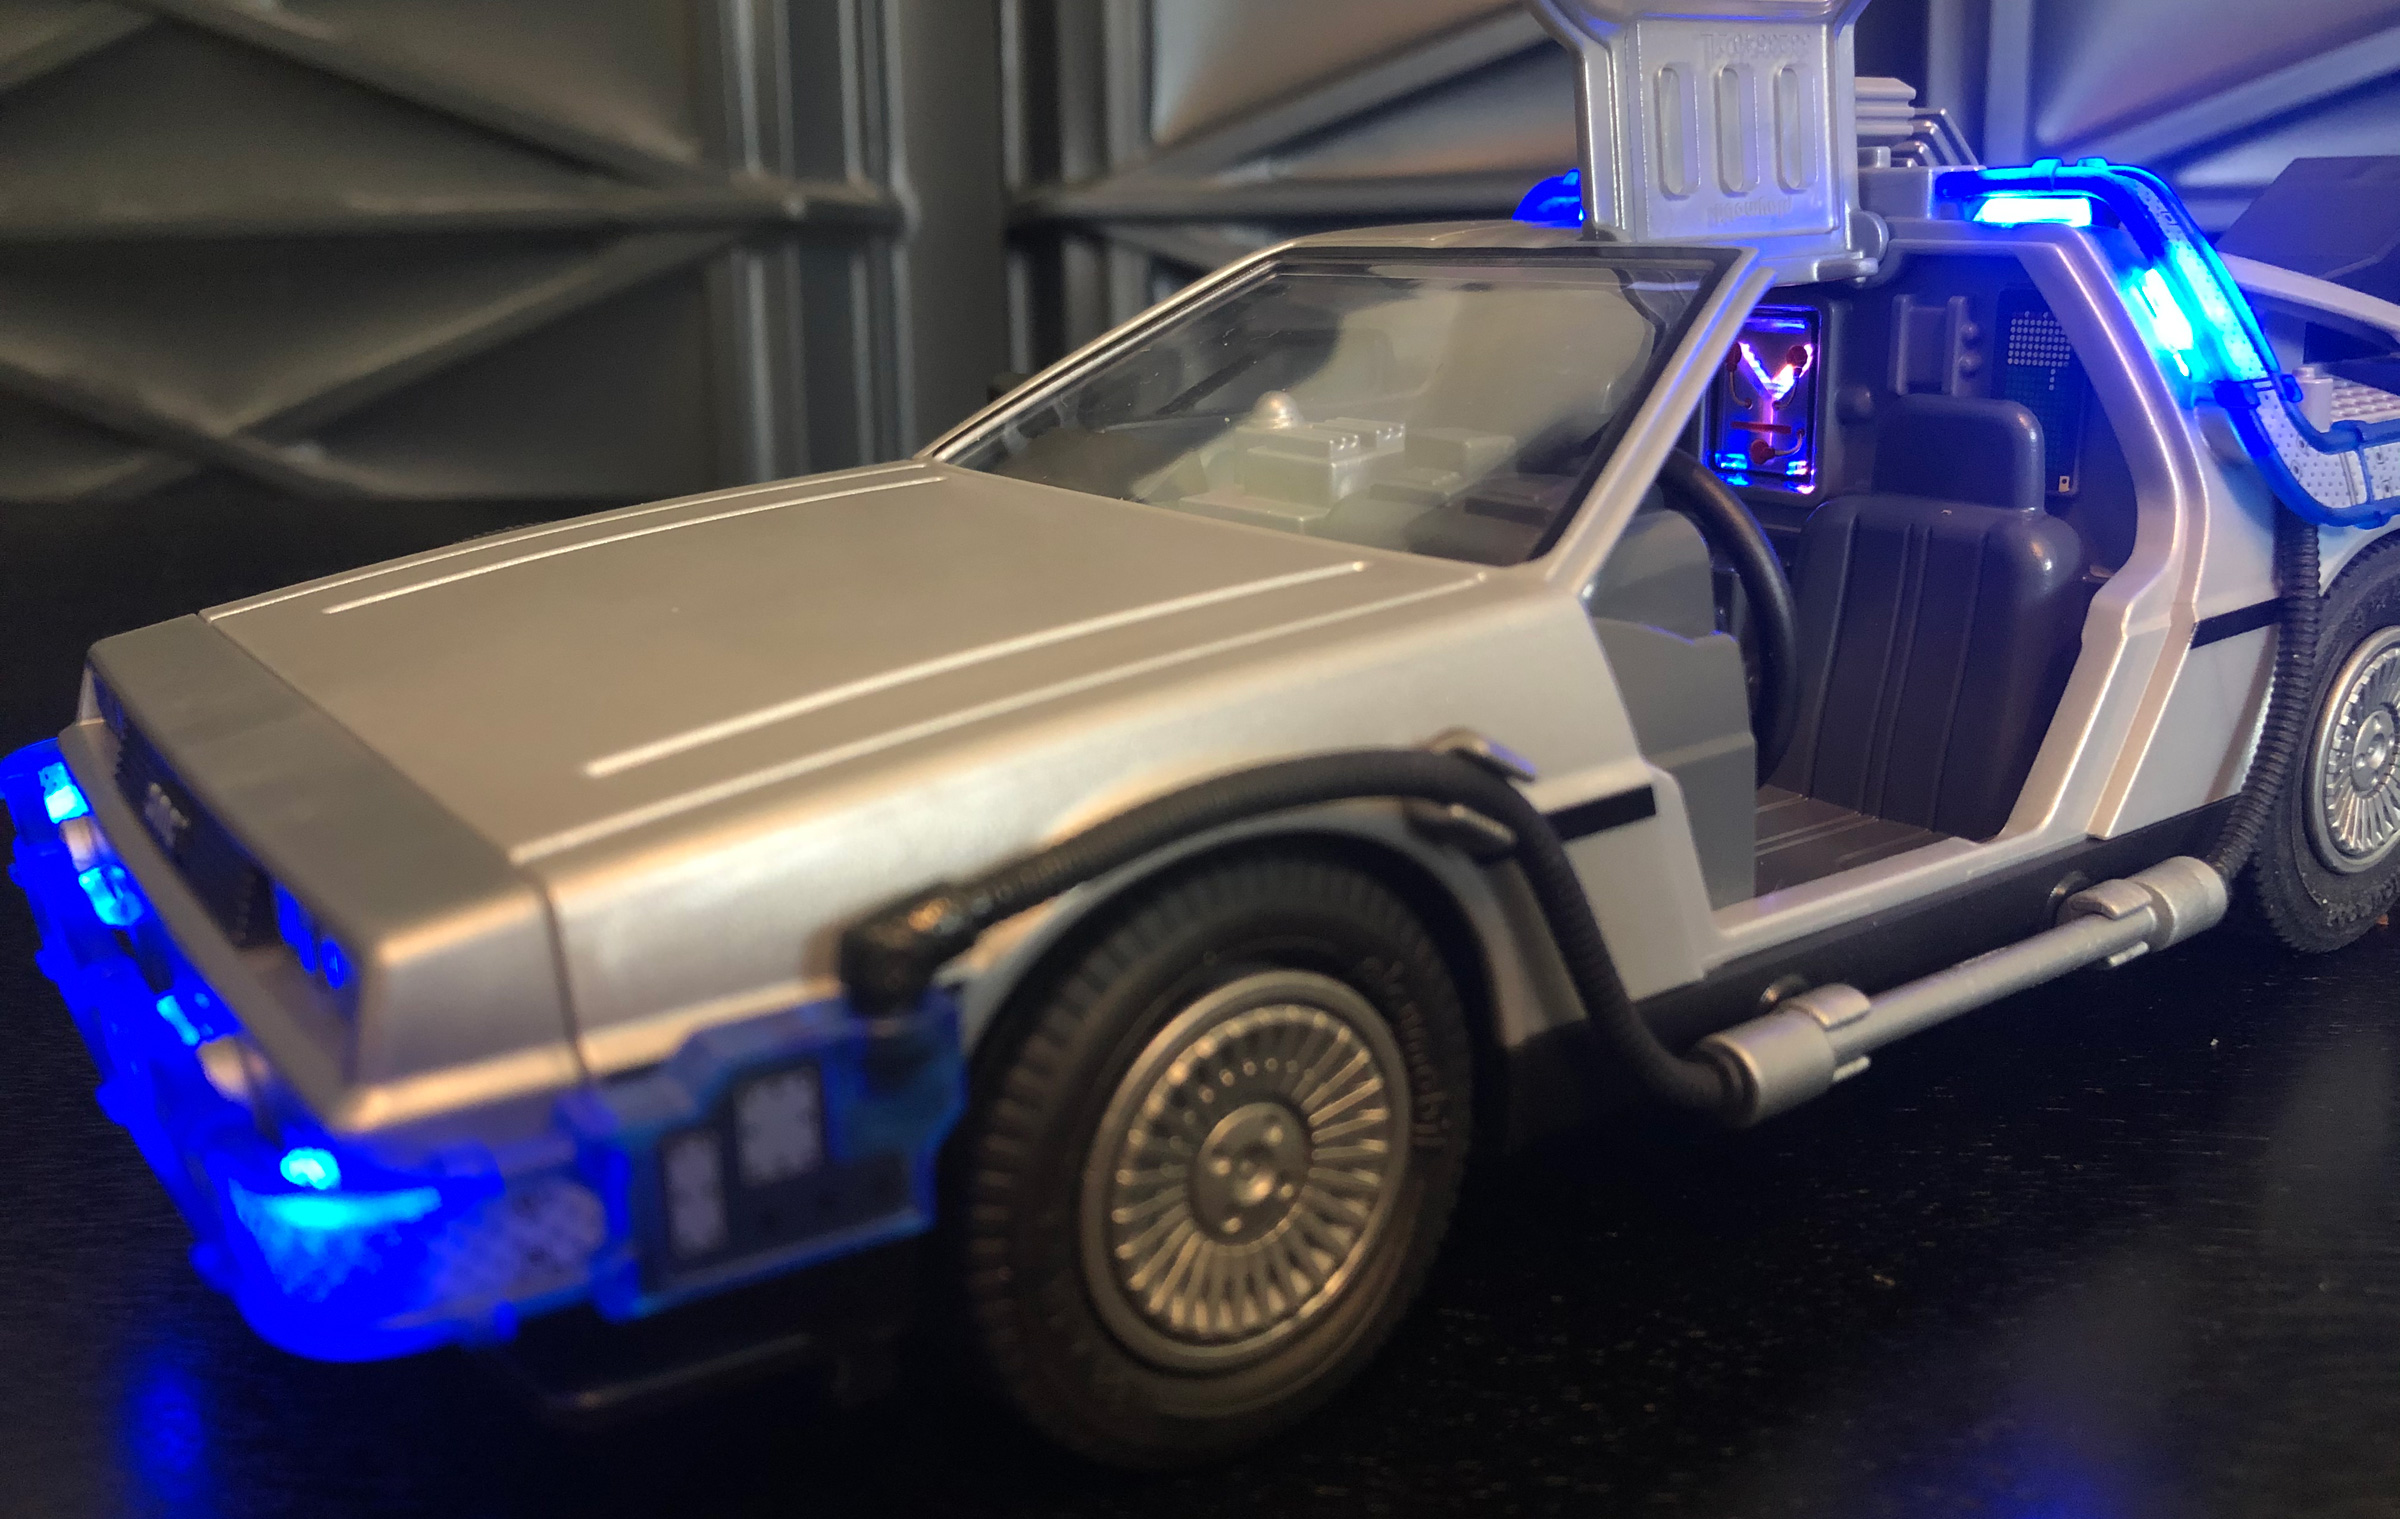 Playmobil Playland: 'Back to the Future' - GeekDad